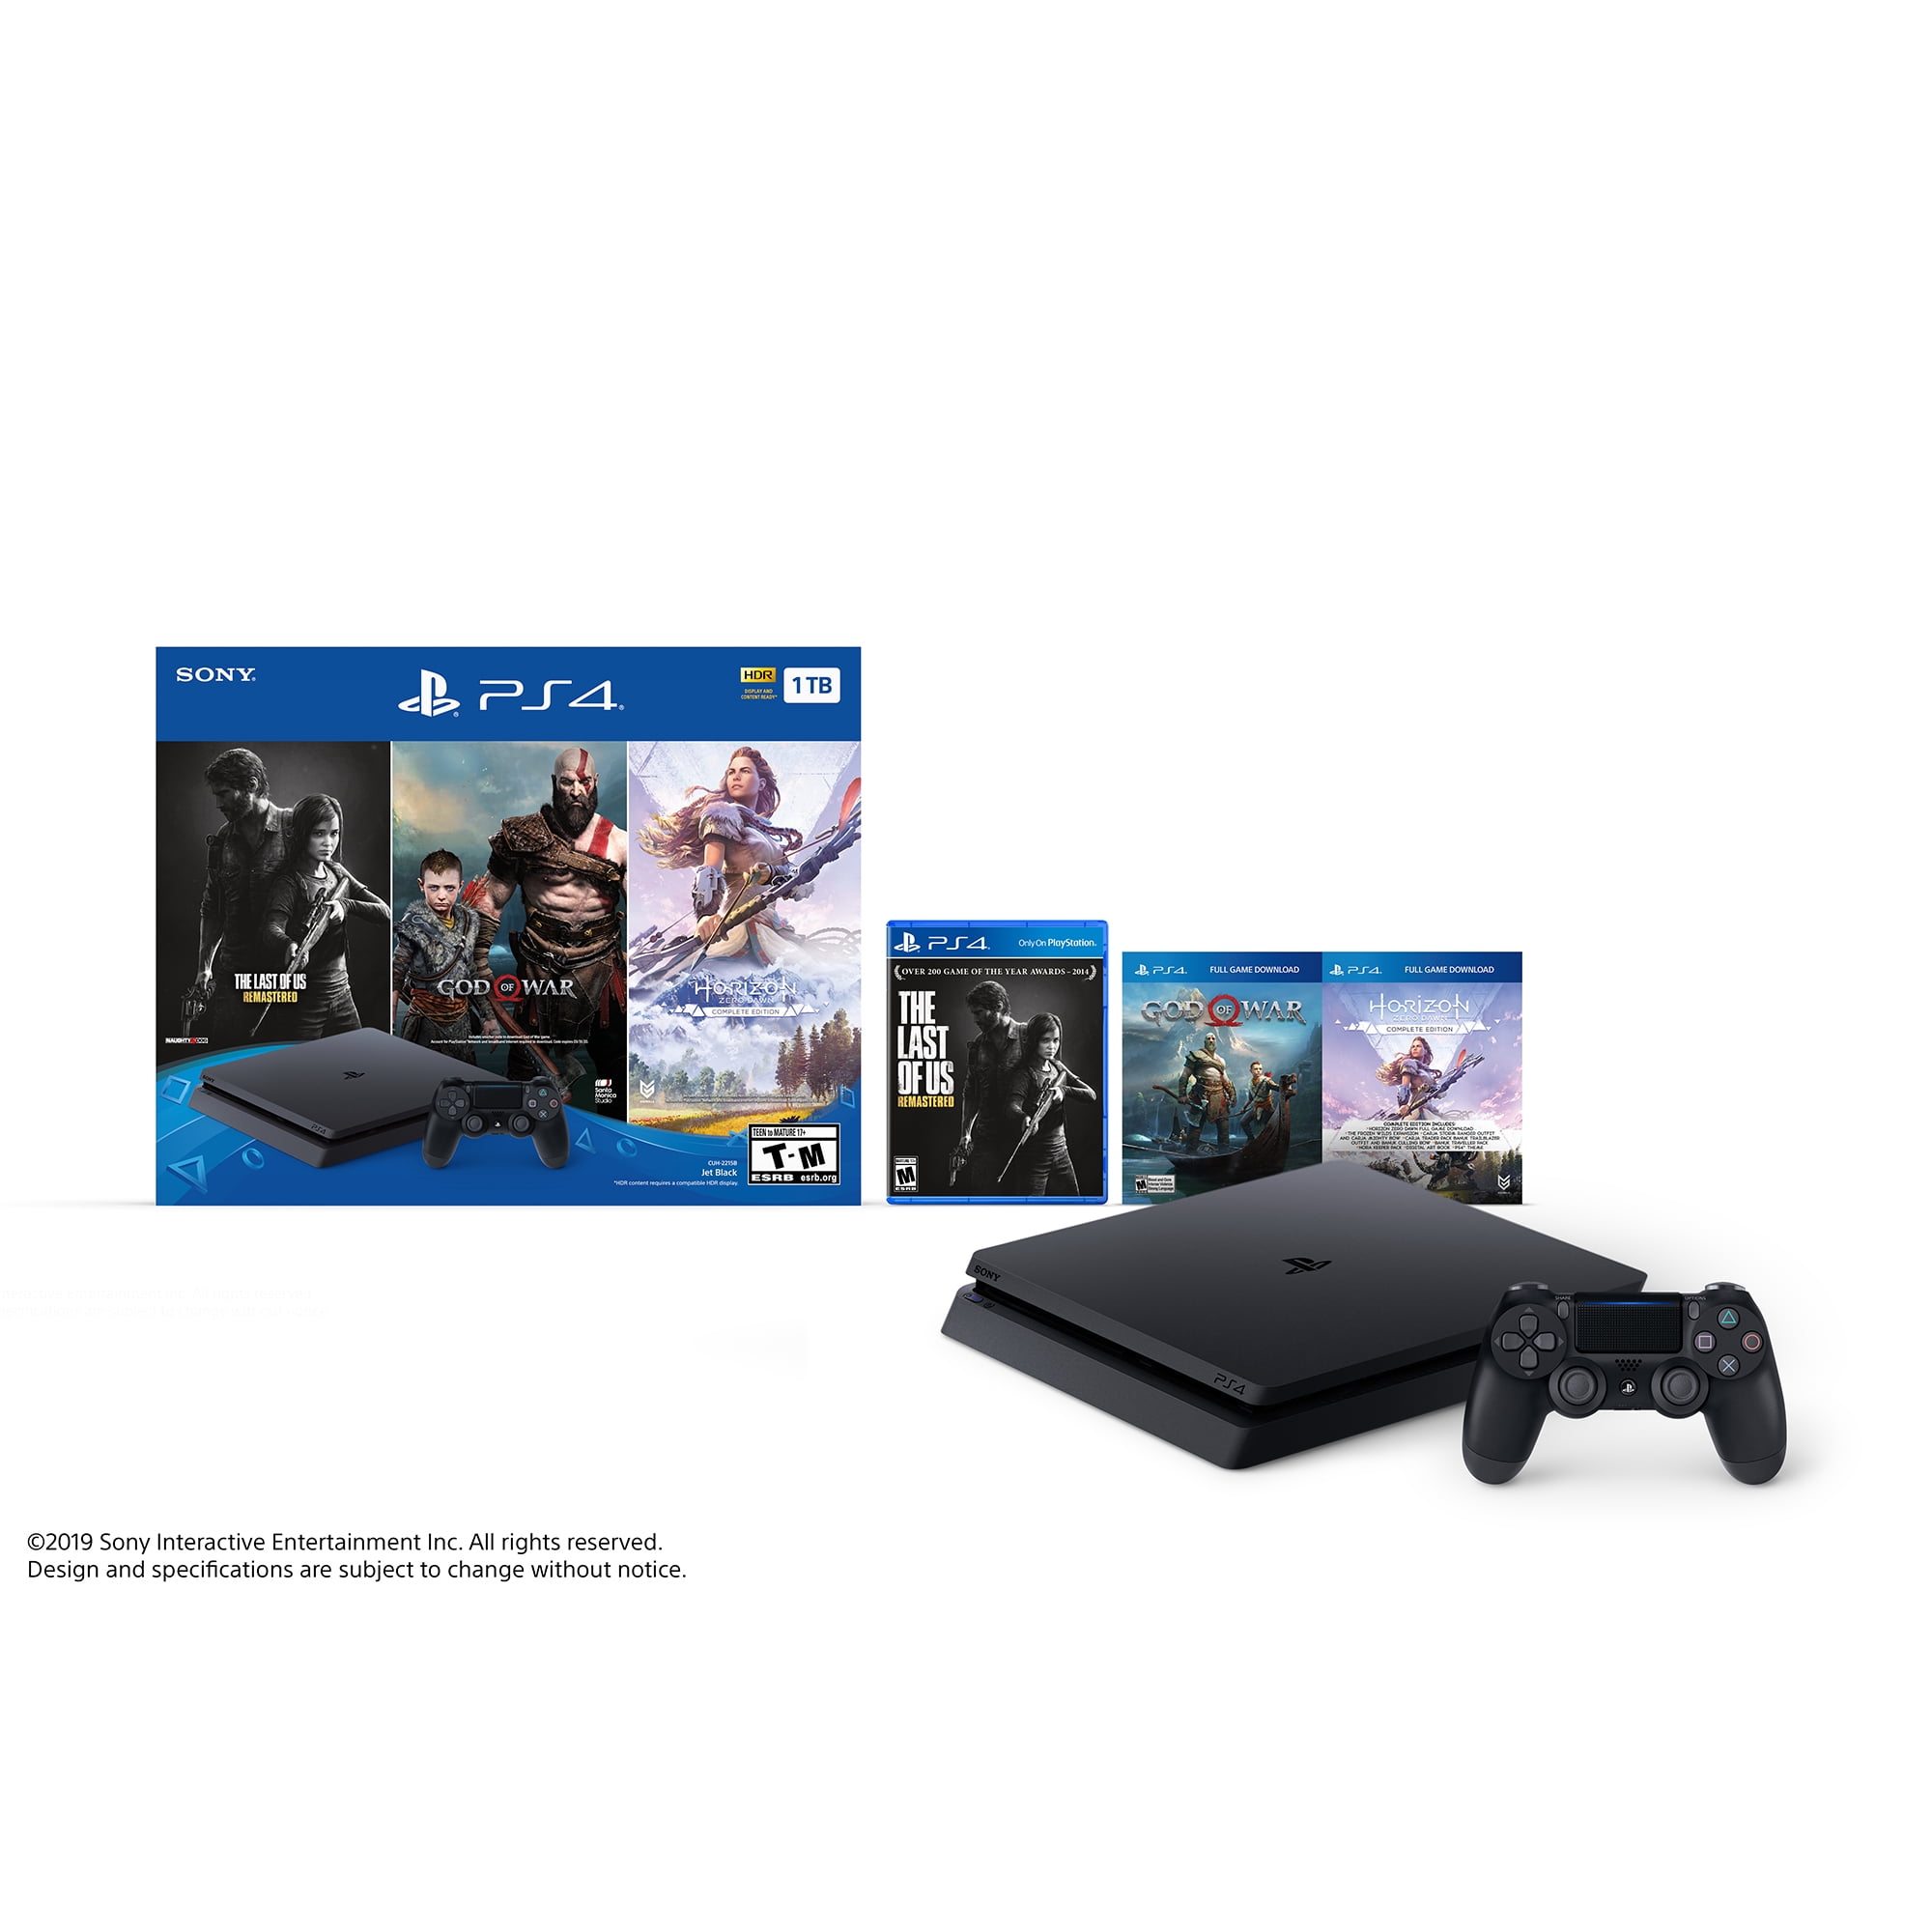 Sony PlayStation 4 Slim 1TB Only PlayStation - Games Bundle: God of War, The Last of Us Remastered, and Horizon Zero Dawn: Complete | Walmart Canada